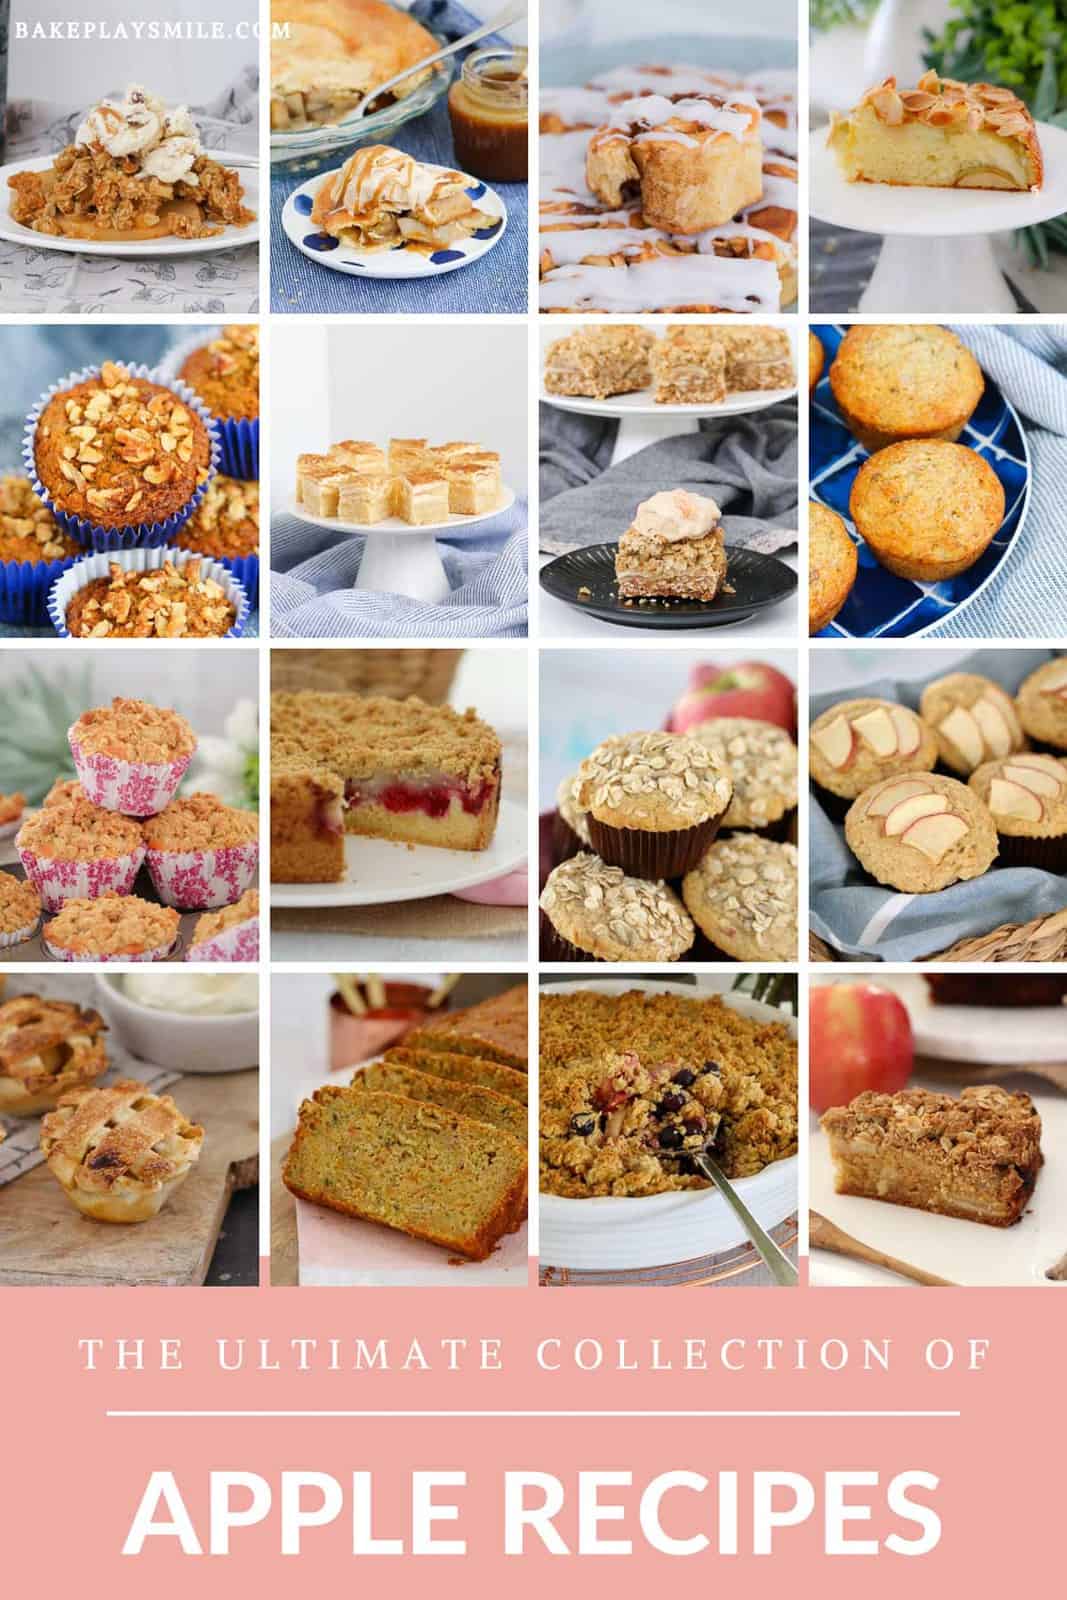 A collage of sweet recipes including cakes, muffins, desserts, crumbles and slices made with apples.